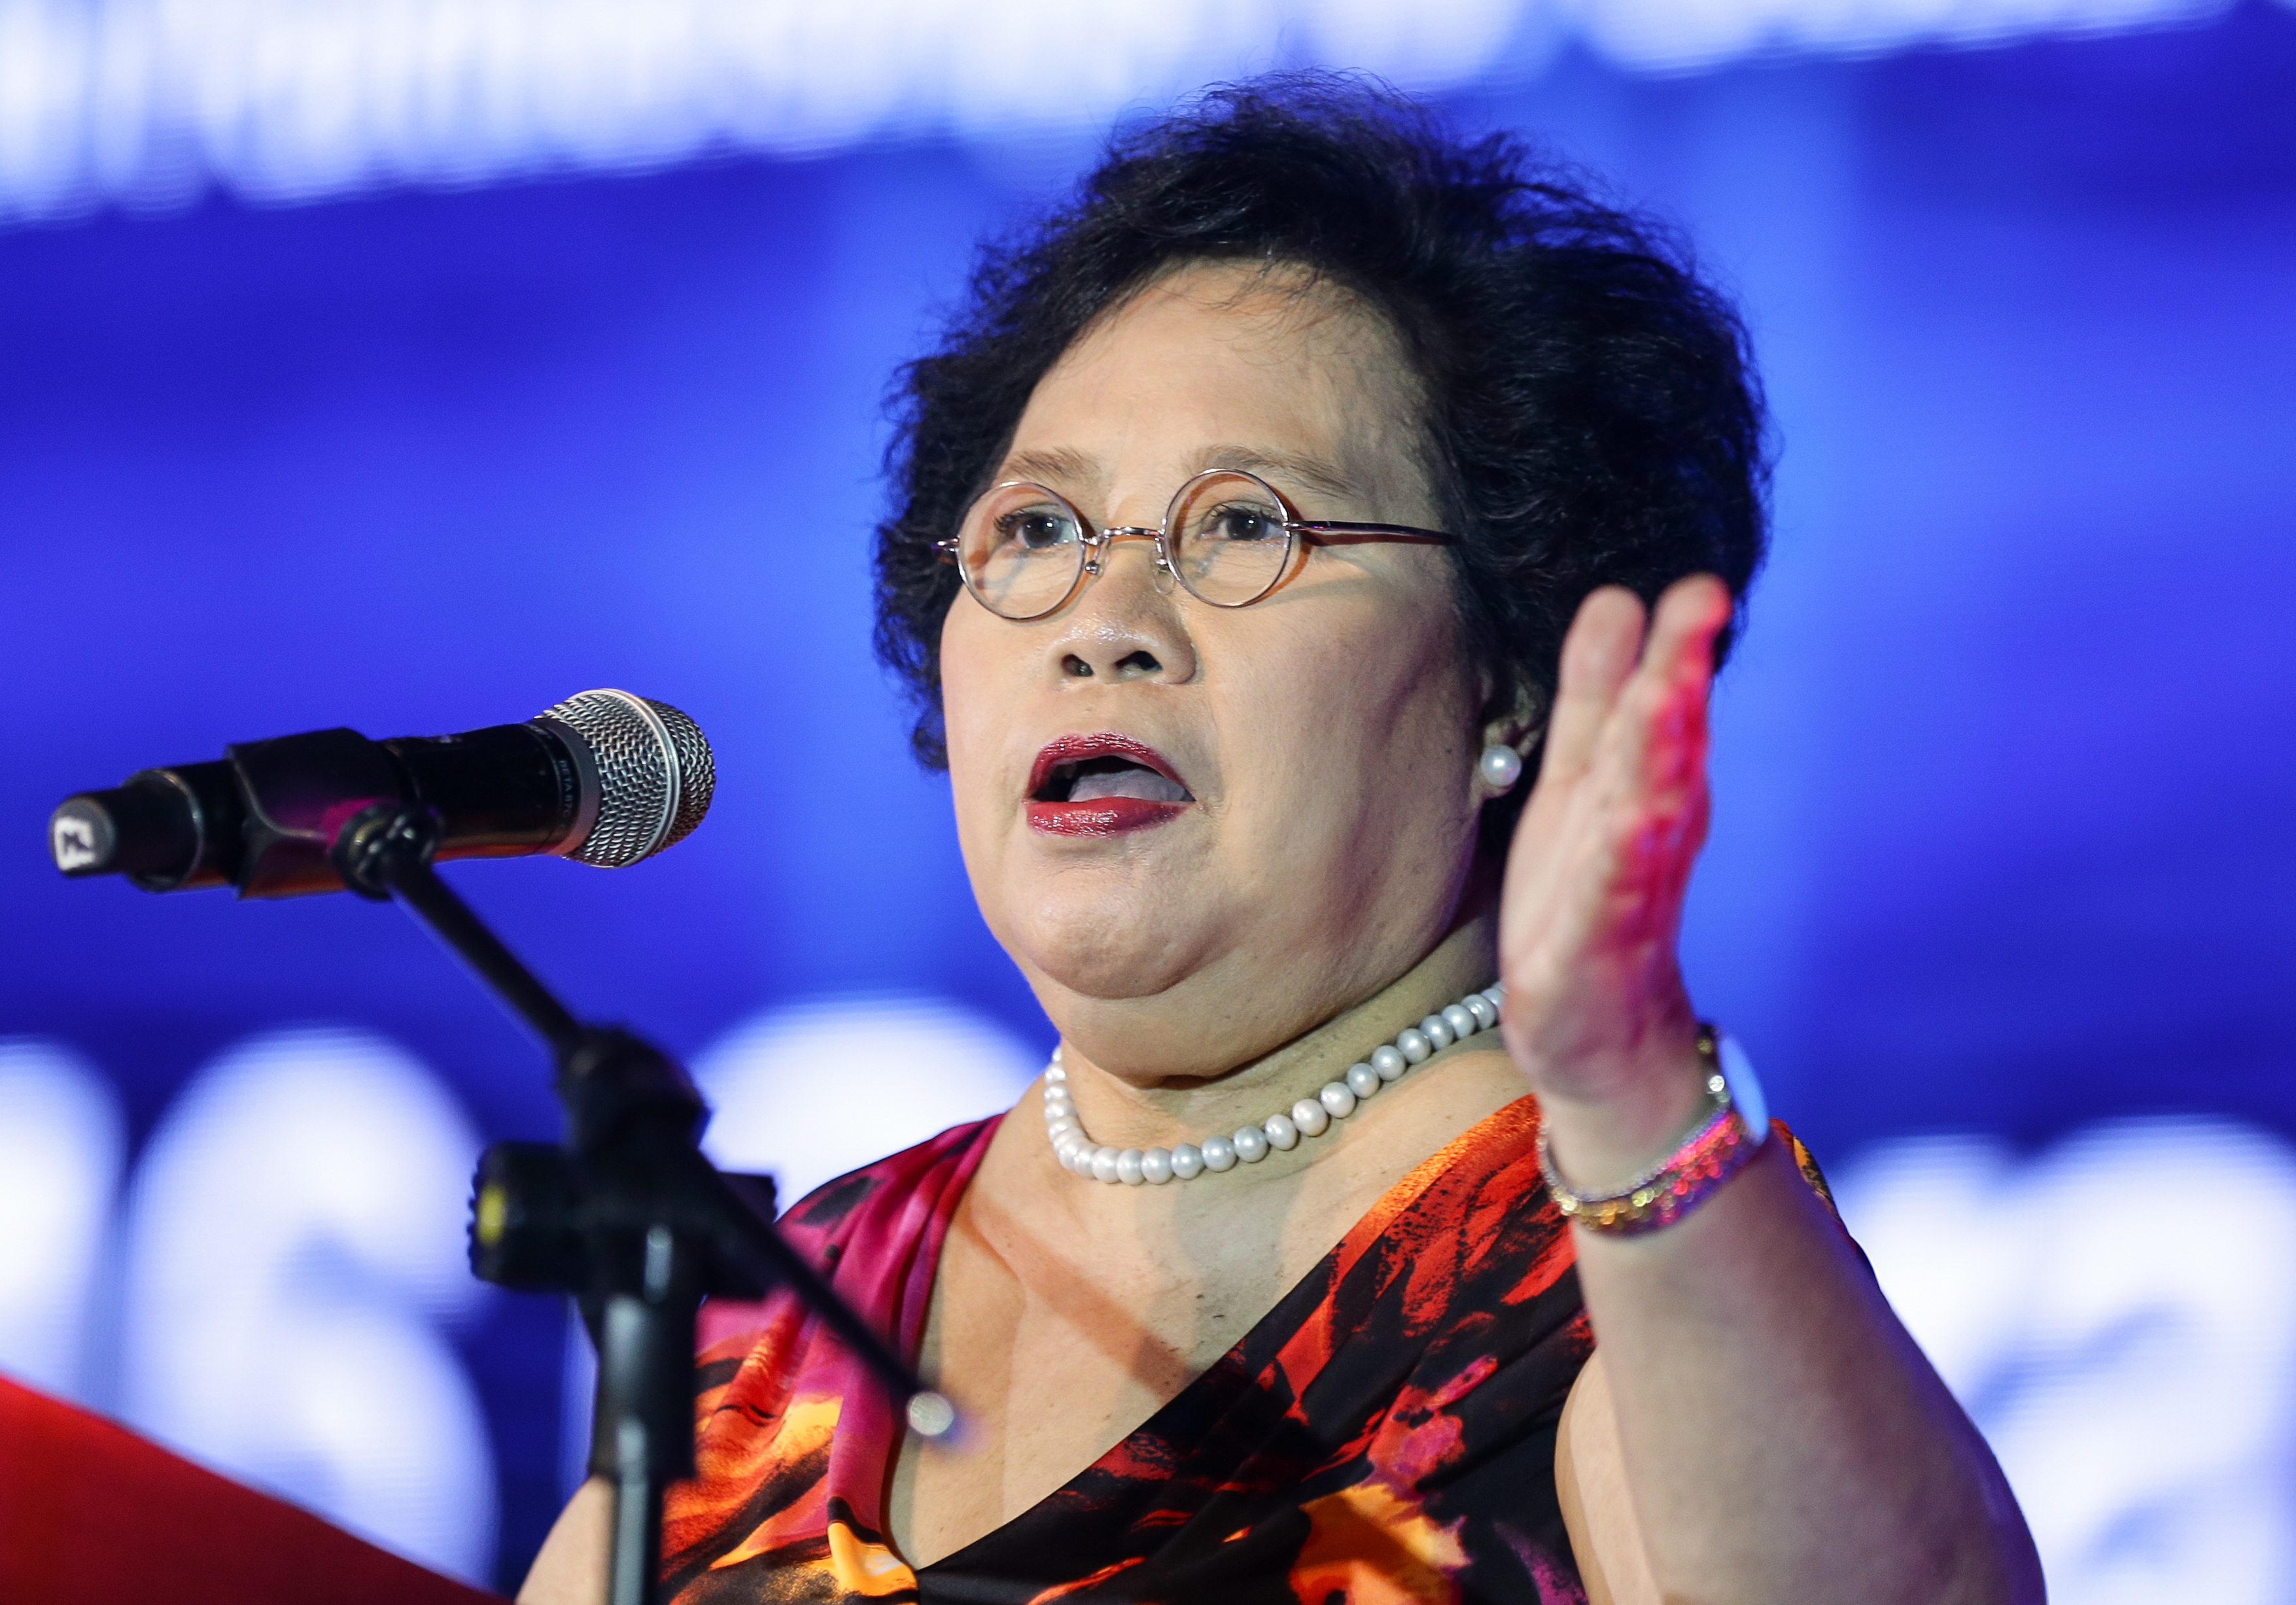 Filipino Senator Miriam Defensor Santiago gives her opening speech during the Vision for Economic Transformation Presidential Forum in Pasay City, south of Manila, Philippines 27 October 2015. The presidential candidates attended the panel discussion of the 41st Philippine Business Conference and Expo. The Philippine presidential and vice presidential election are scheduled on 09 May 2016. EPA/MARK R. CRISTINO 